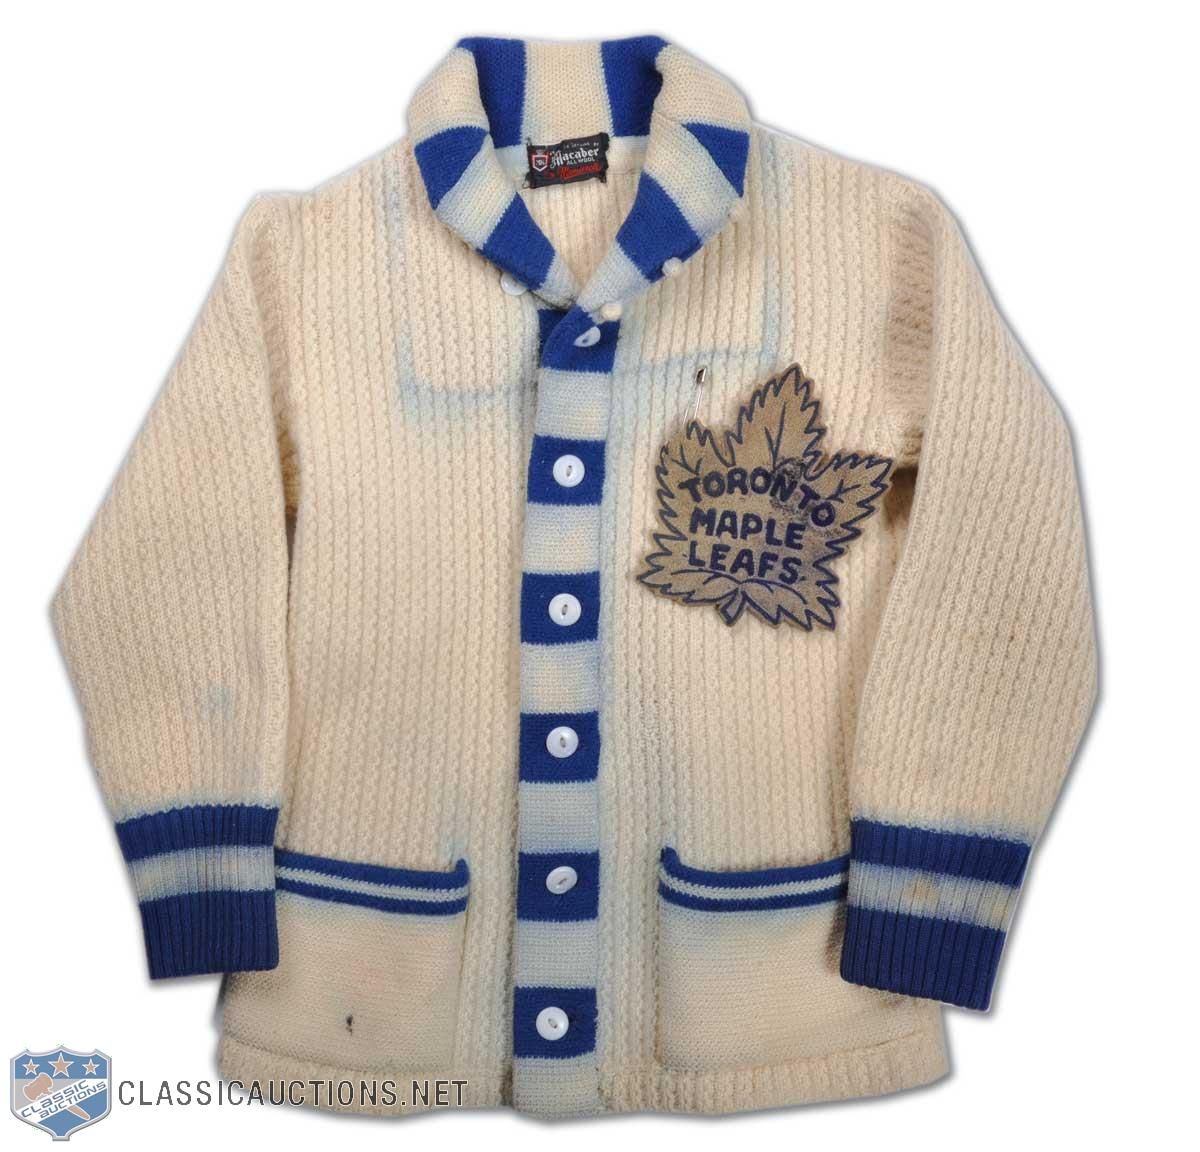 Former Leafs' captain Ted Kennedy's 1940s Toronto Maple Leafs Wool Cardigan  (I would wear this in a heartbeat!). …